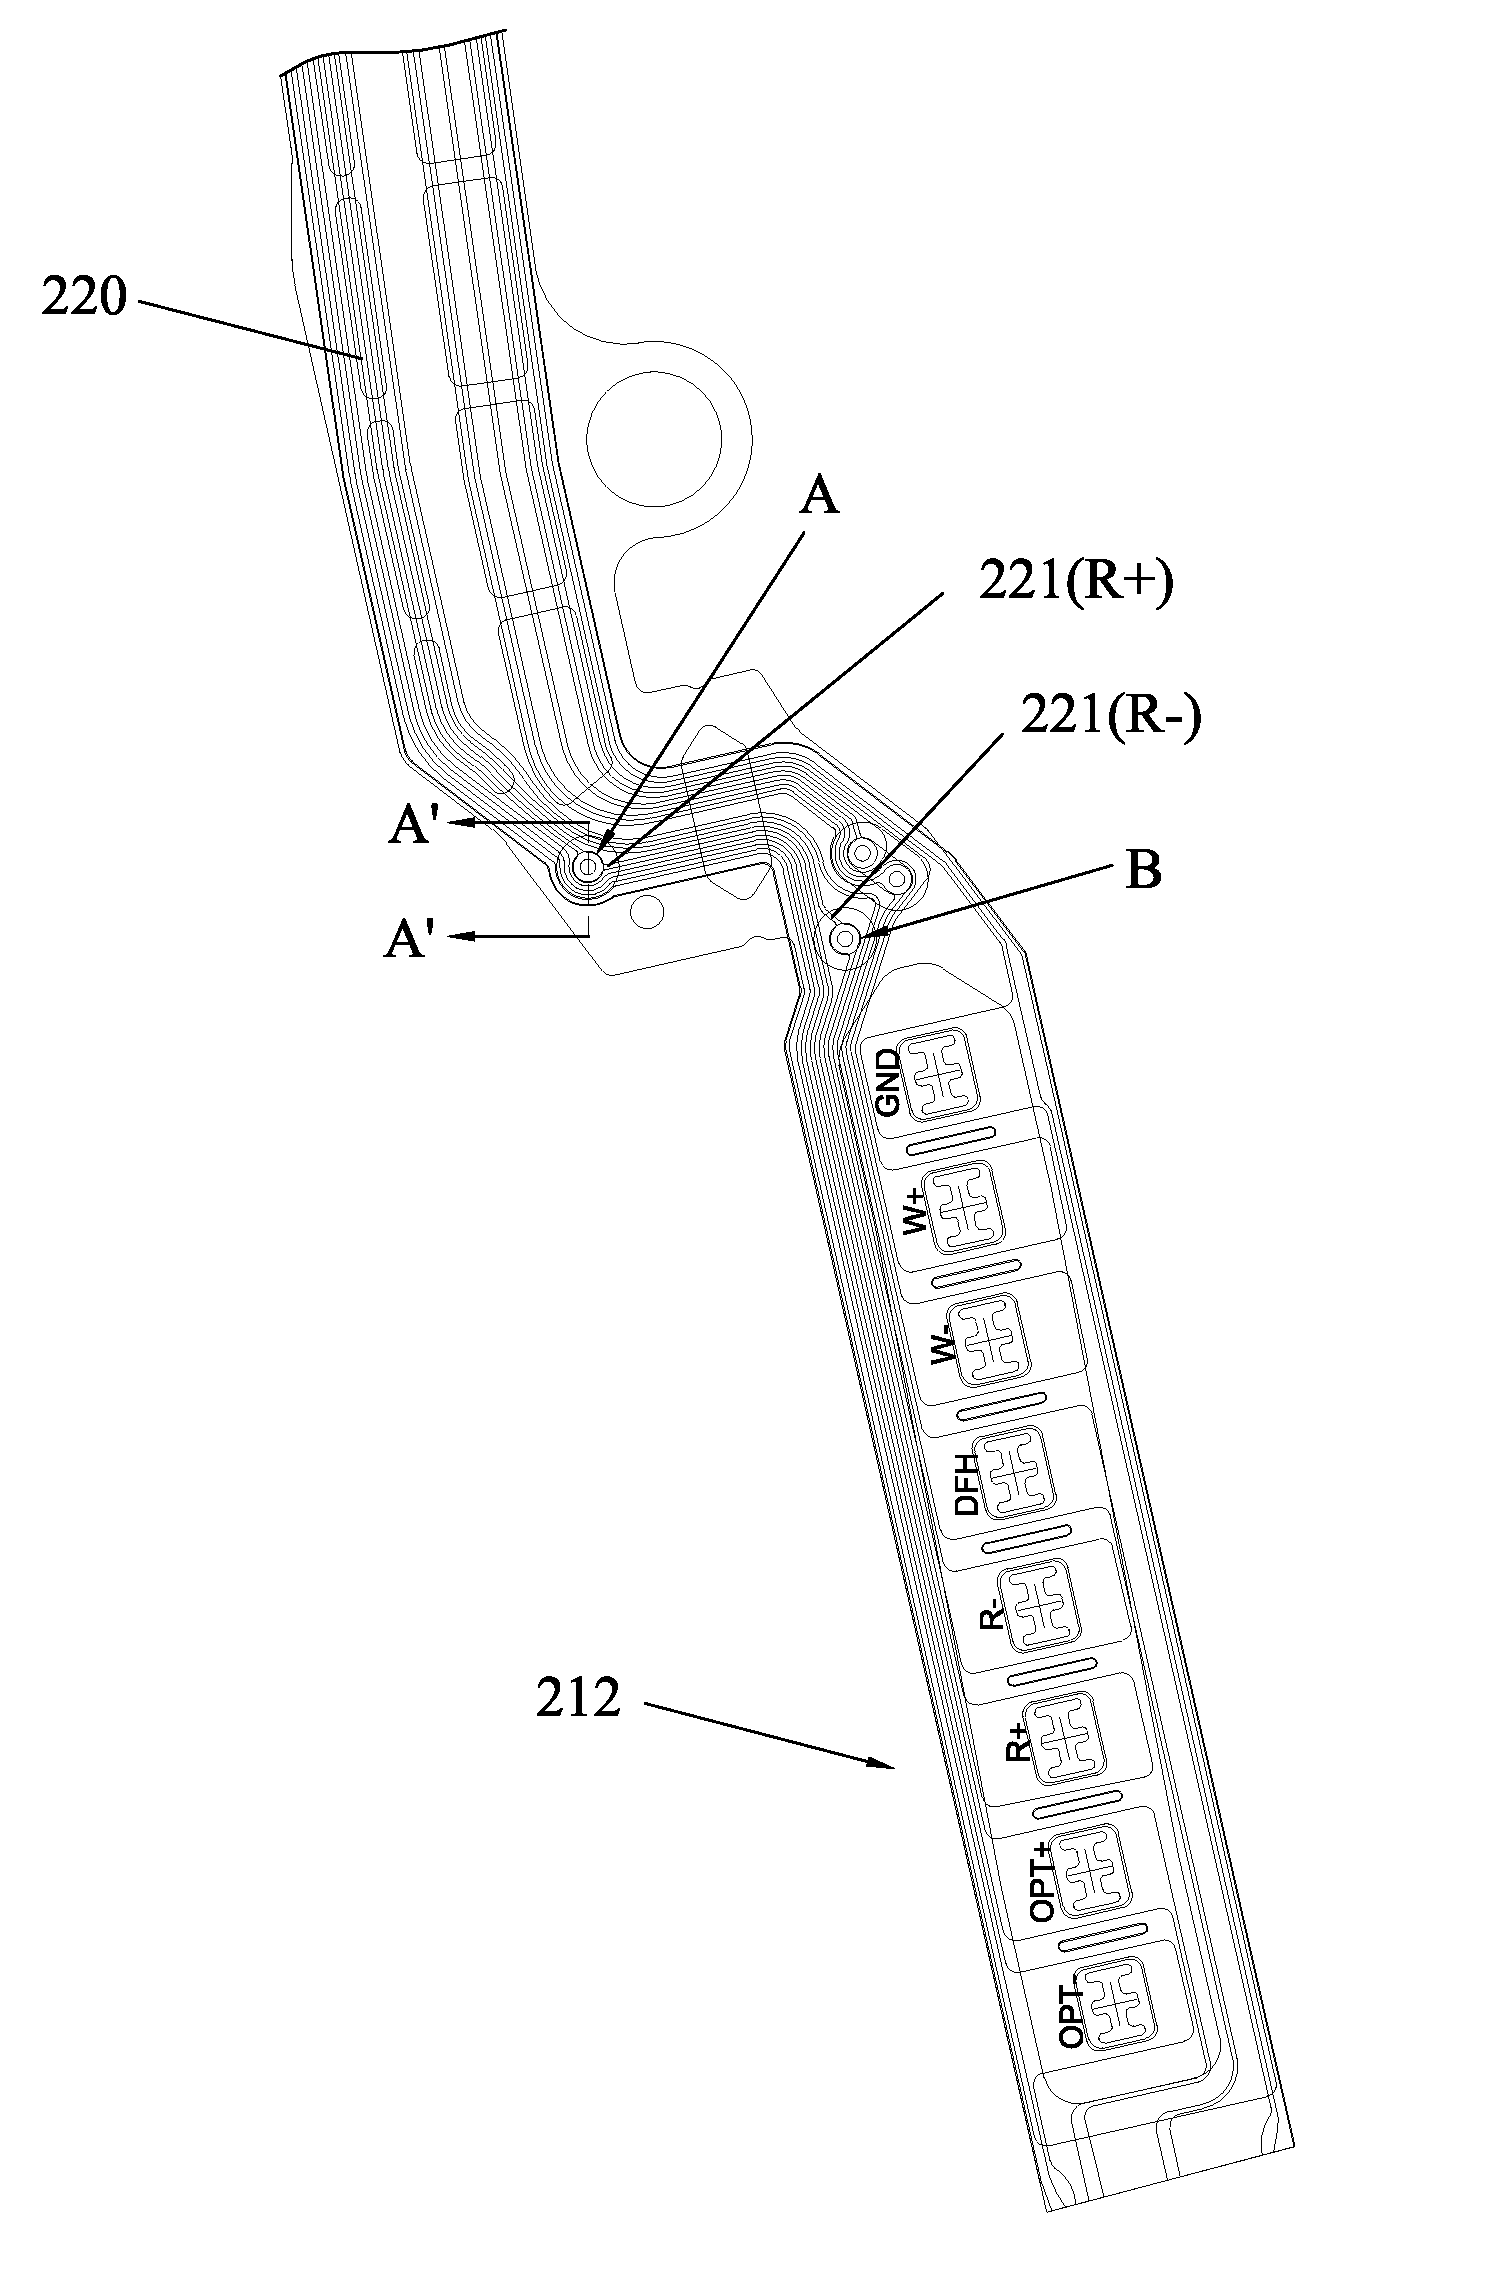 Disk drive head suspension including a grounded conductive substrate